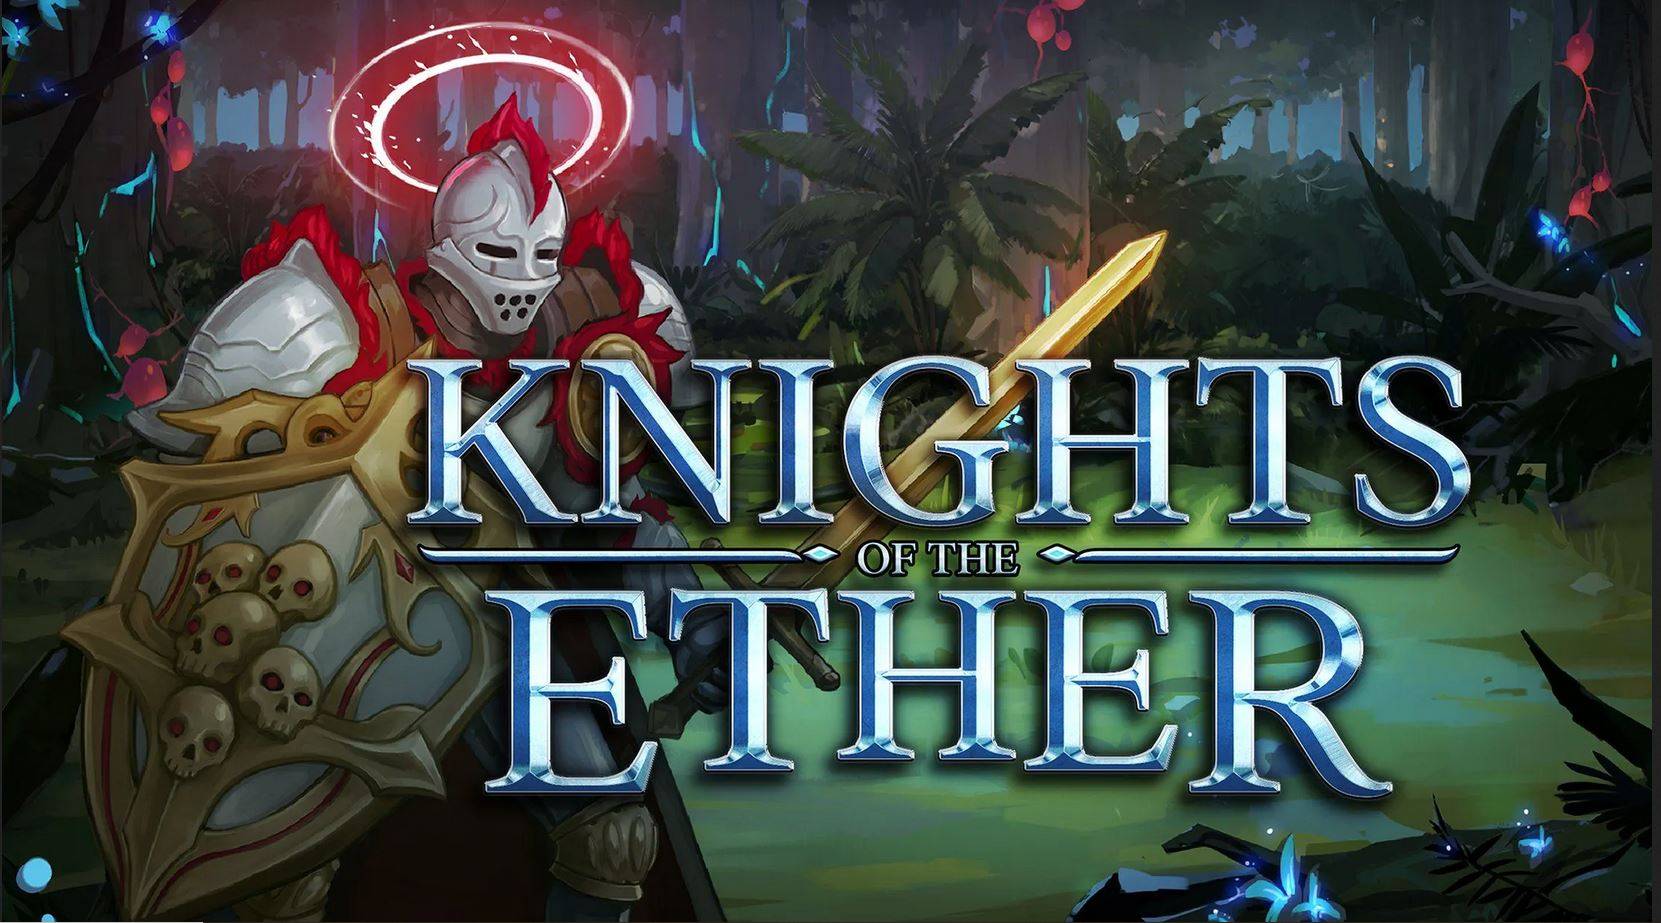 Knights of the Ether: Blightfell - Web3 P2E Blockchain Game